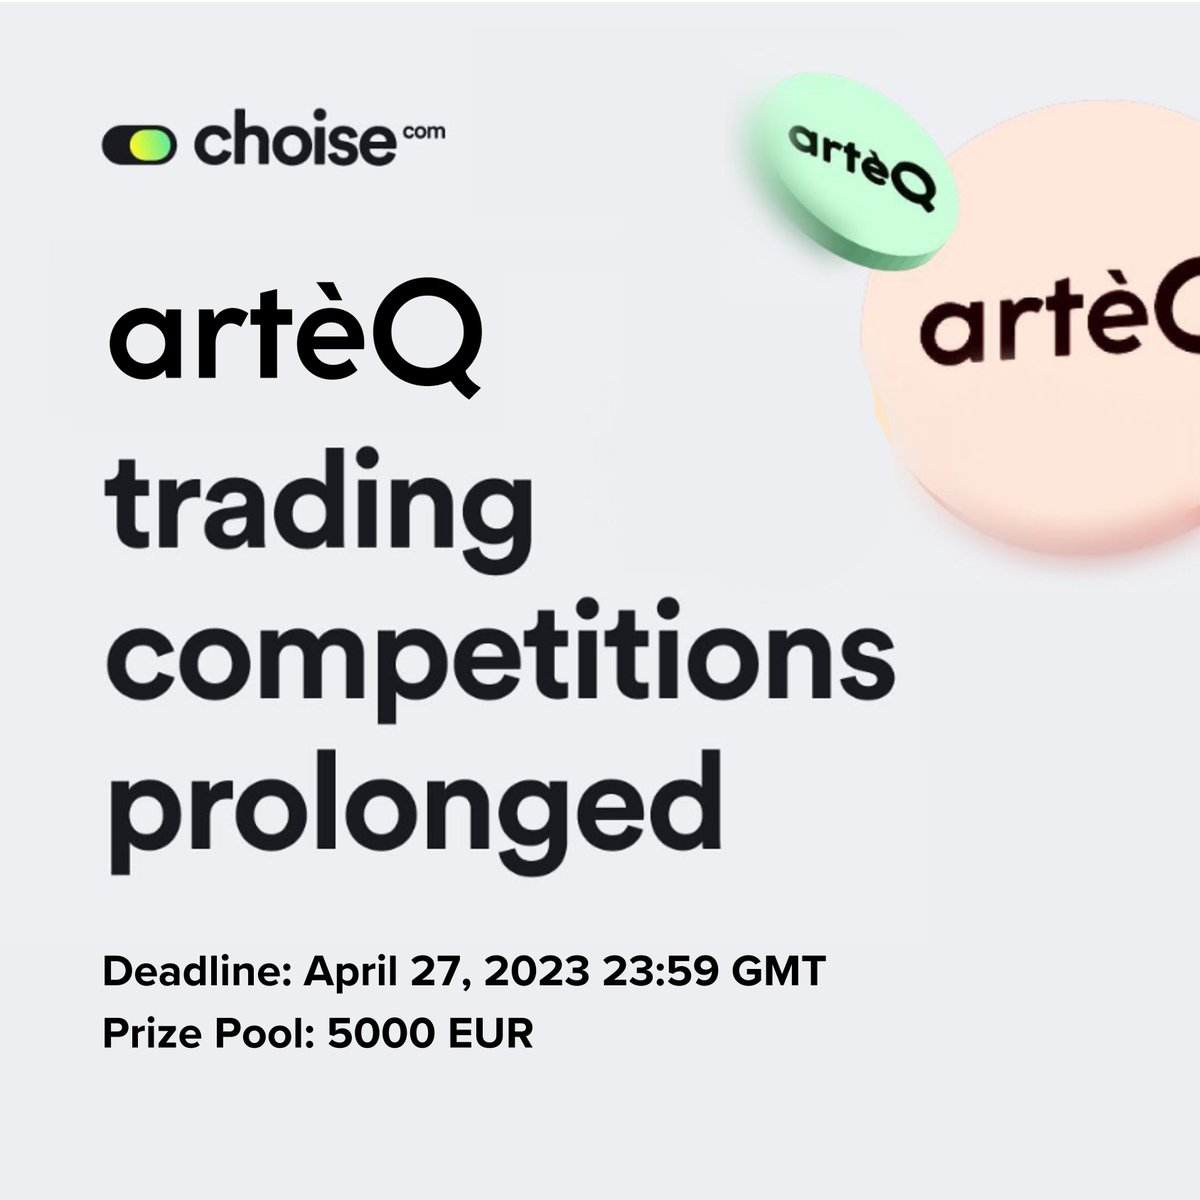 Buy tokens with fiat (bank card) or USDT to grow your trading volume. First three traders with the highest trading volume among all users will split 5,000 EUR in $ARTEQ Tokens! 🪙🪙🪙 Participate here: choise.com